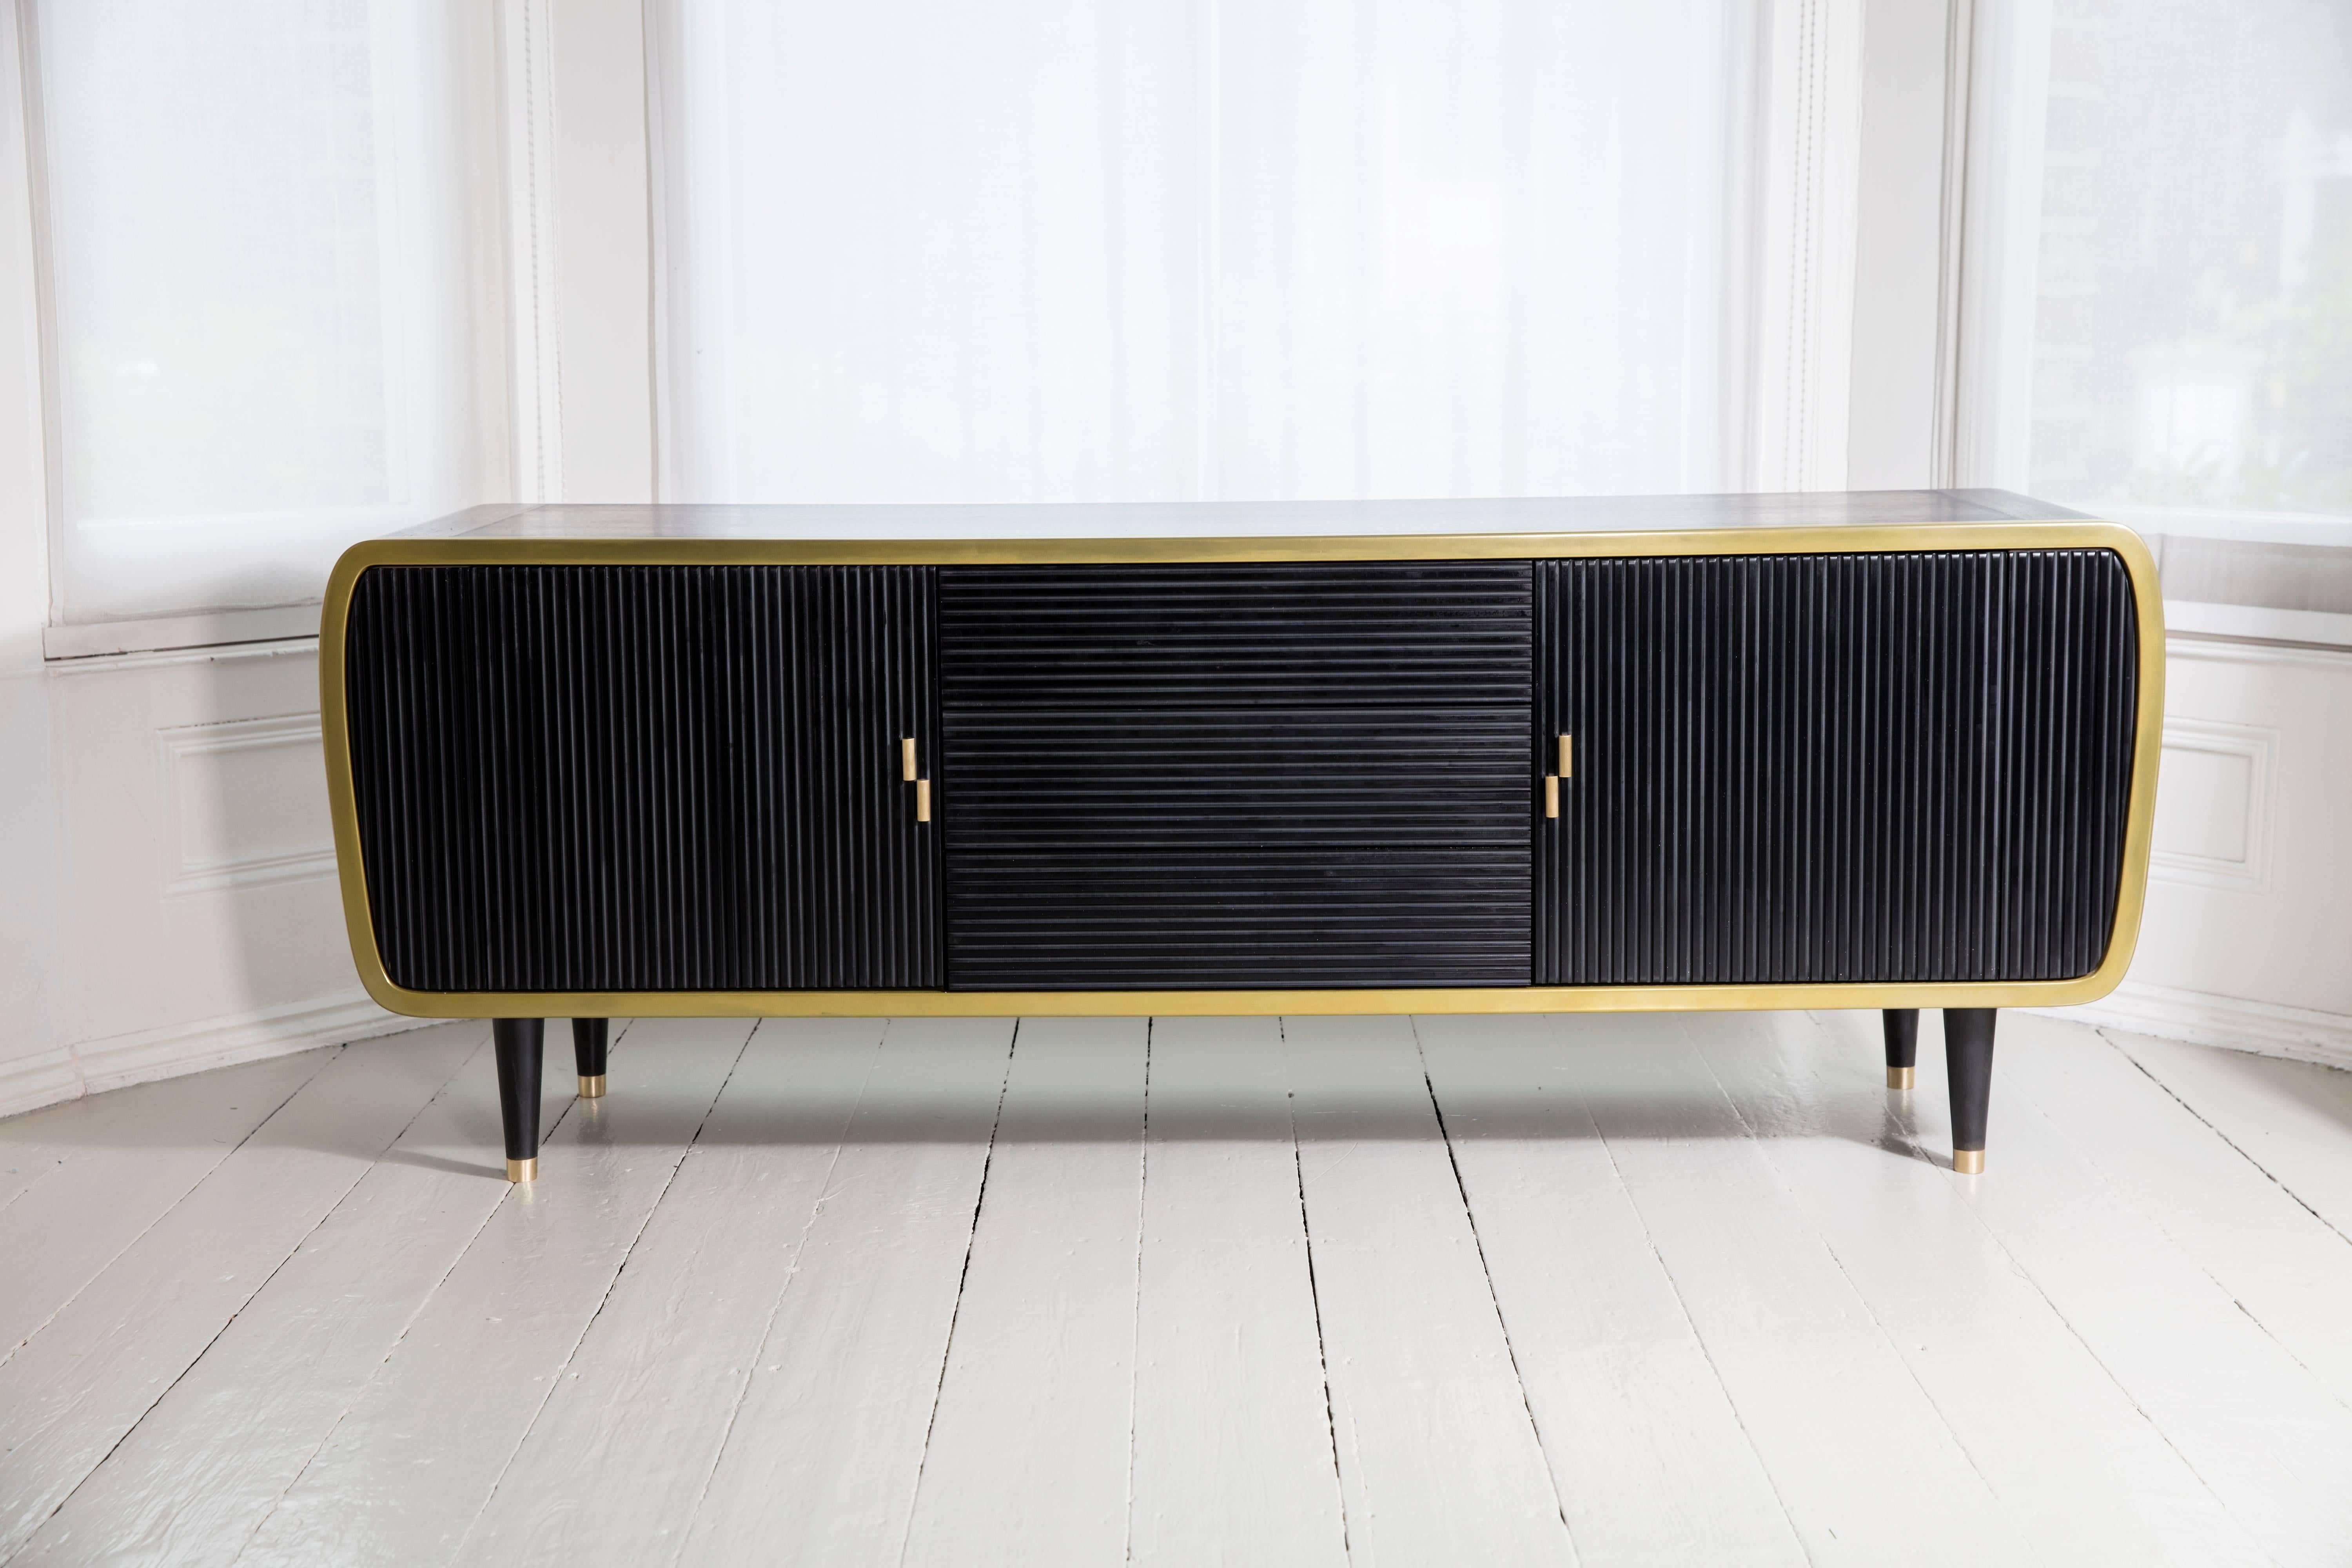 This beautiful limited edition piece consists of blackened oak and brass, with drawers lined in suede fabric. A true statement piece! The front is drawers and doors are made of corian with discrete brass handles. The inner cupboards have glass